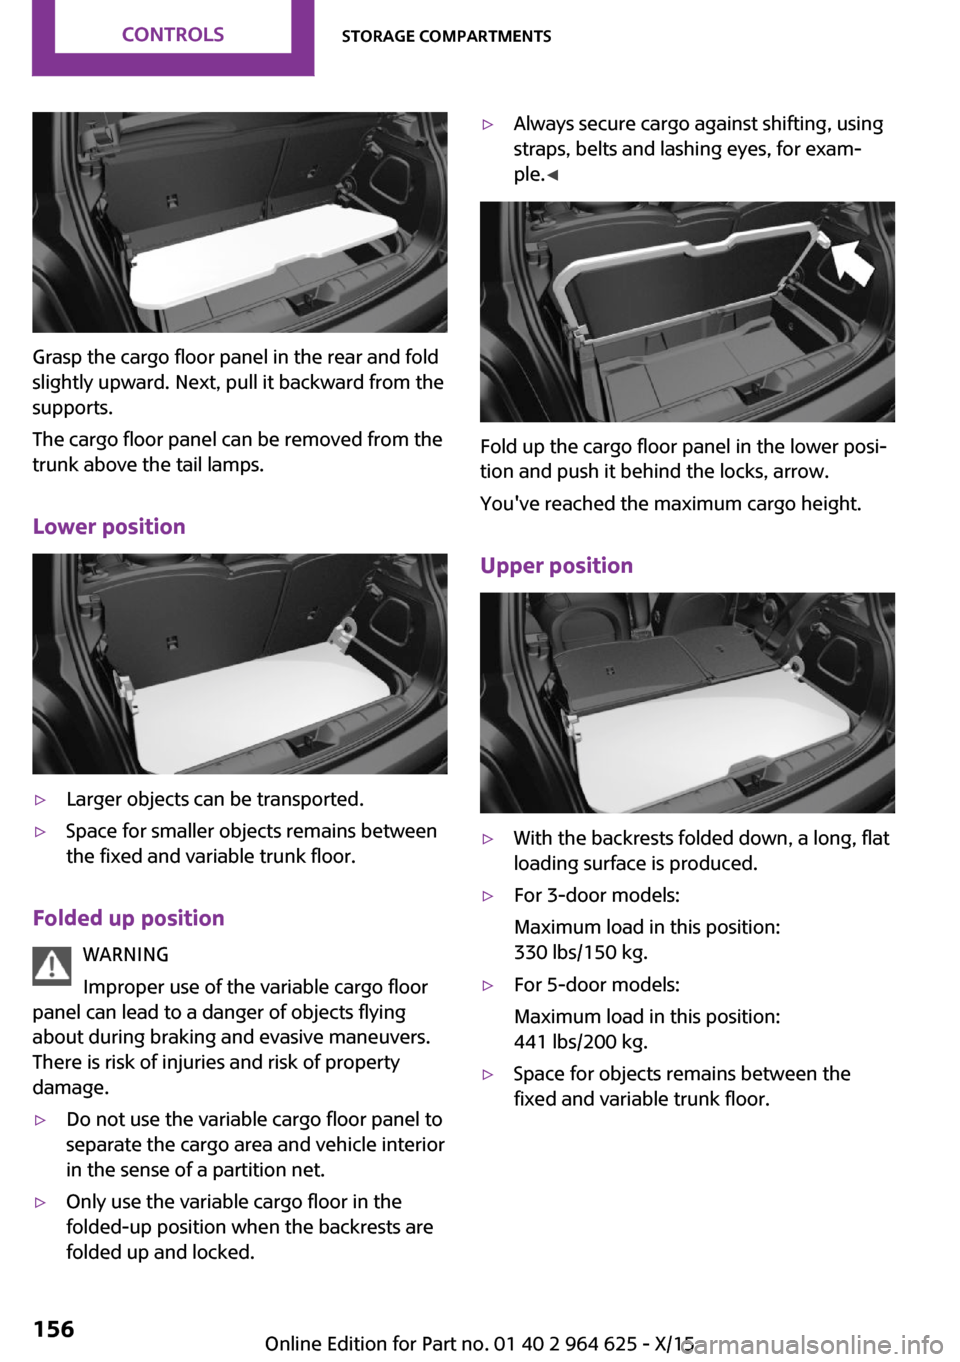 MINI 3 door 2015 Owners Guide Grasp the cargo floor panel in the rear and fold
slightly upward. Next, pull it backward from the
supports.
The cargo floor panel can be removed from the
trunk above the tail lamps.
Lower position
▷